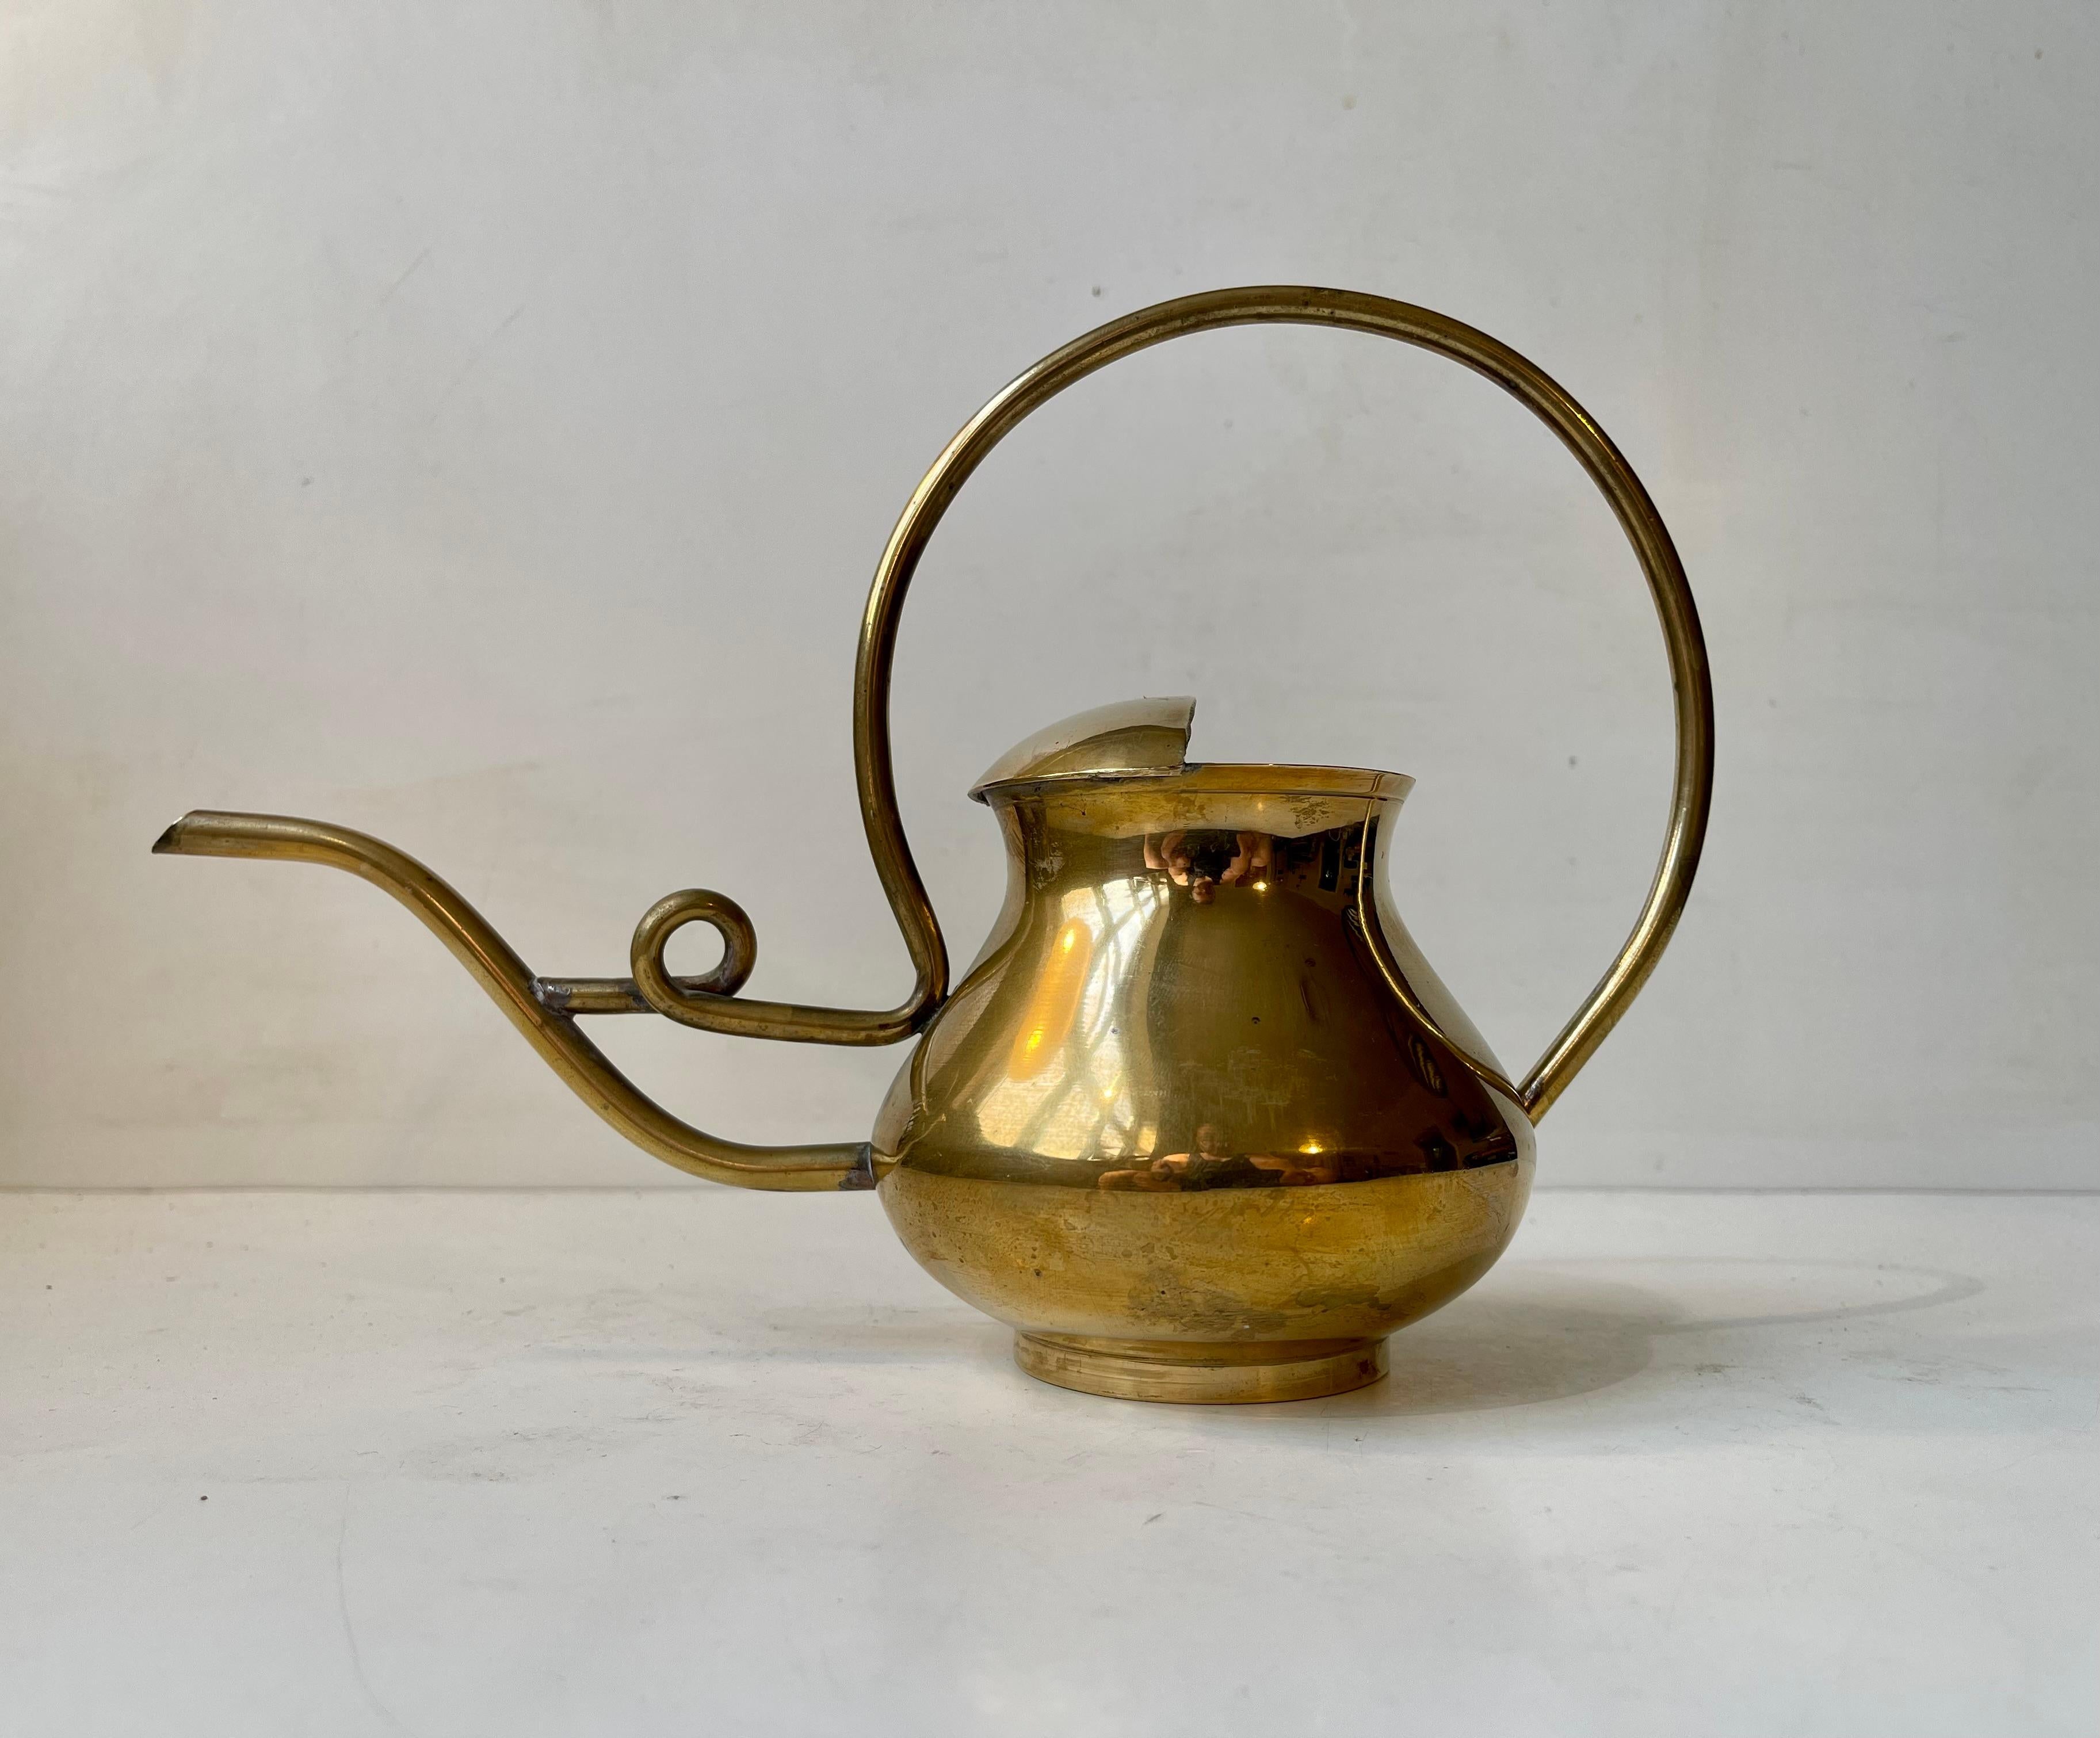 Vintage brass watering can with a beautiful form! It features a spiraling spout perfect for directional watering of houseplants as orchids or other delicate plants. Holds enough water for two-four small to medium sized plants . Measurements: H: 18